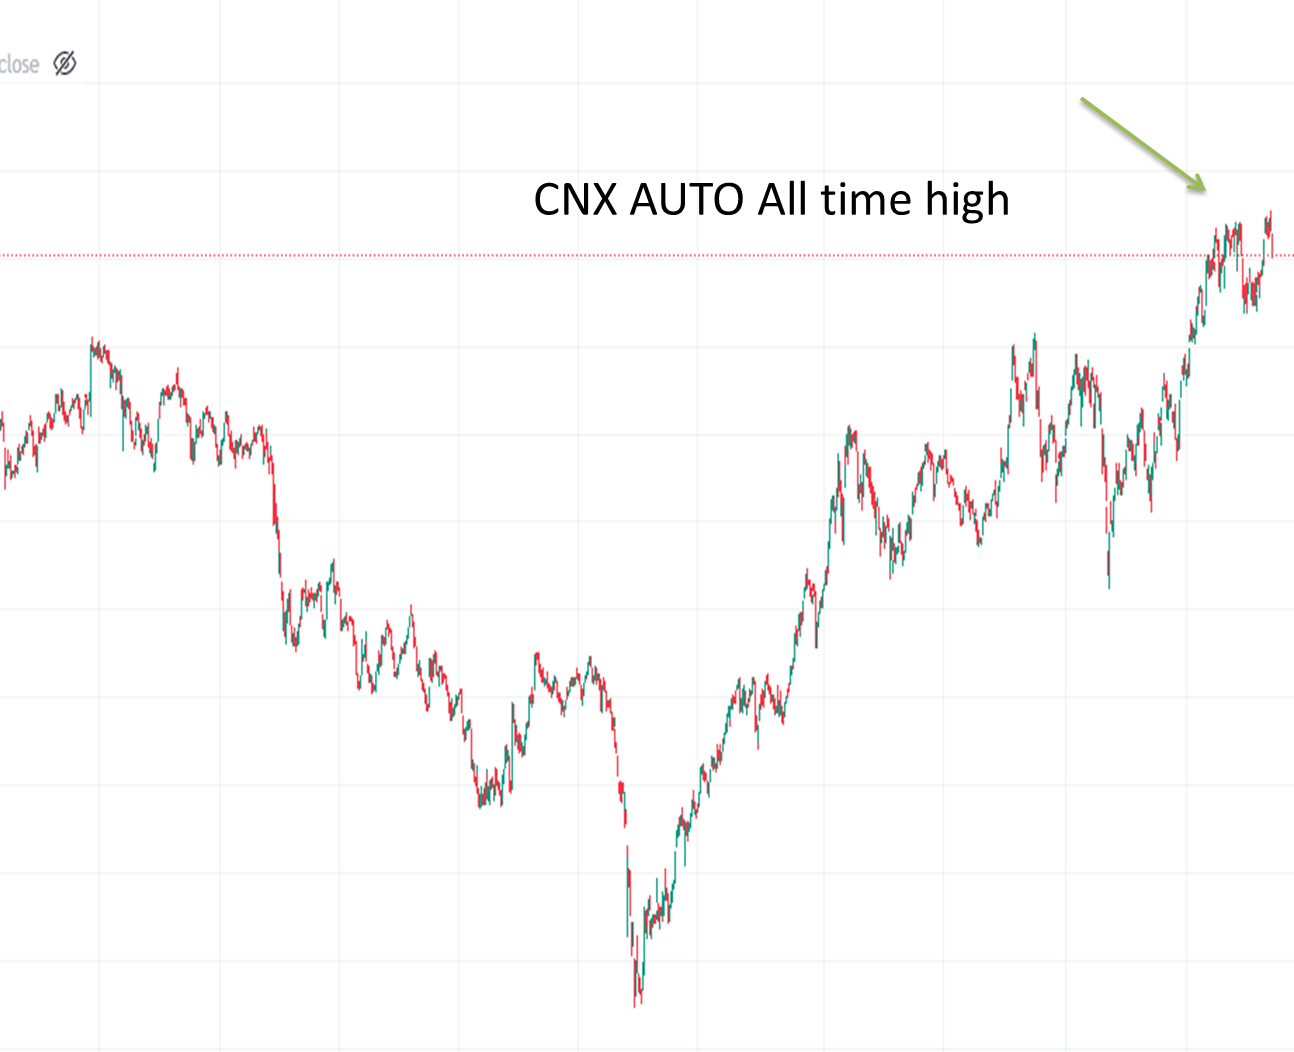 All time high sector- Auto